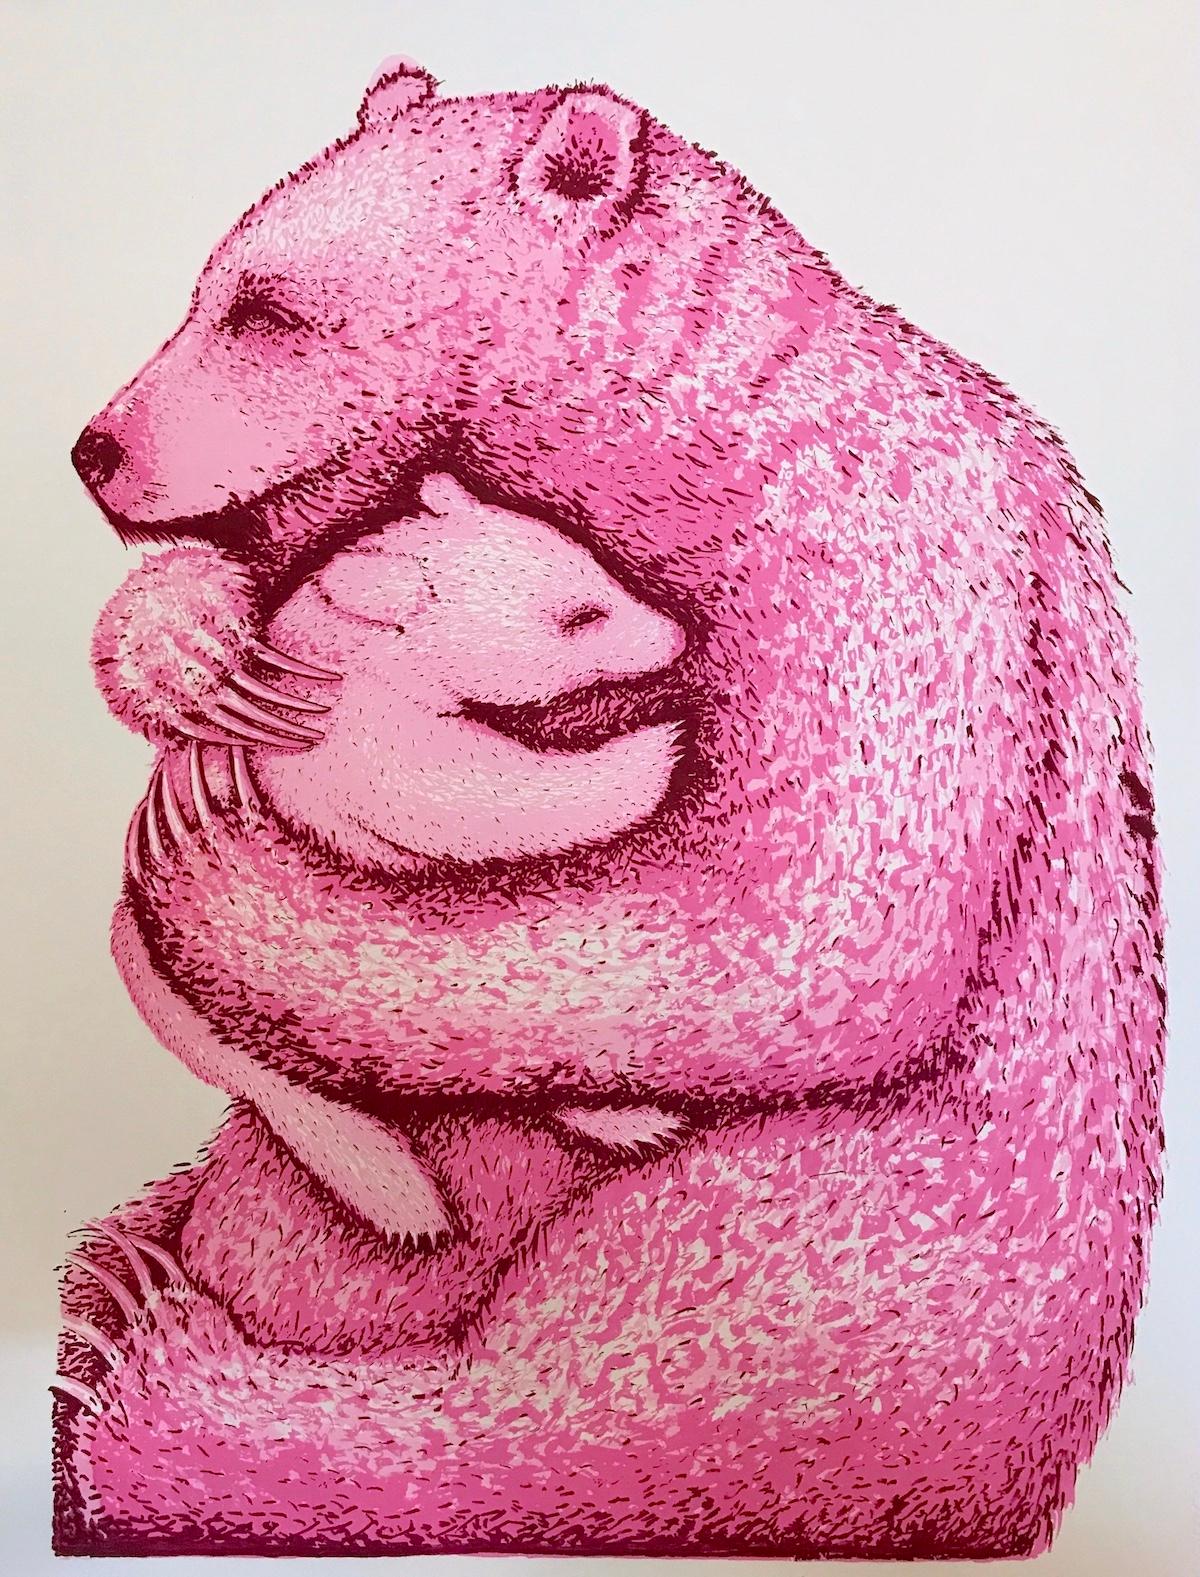 Bear Hugs (Hot Pink and Blue) Diptych - Contemporary Print by Tim Southall